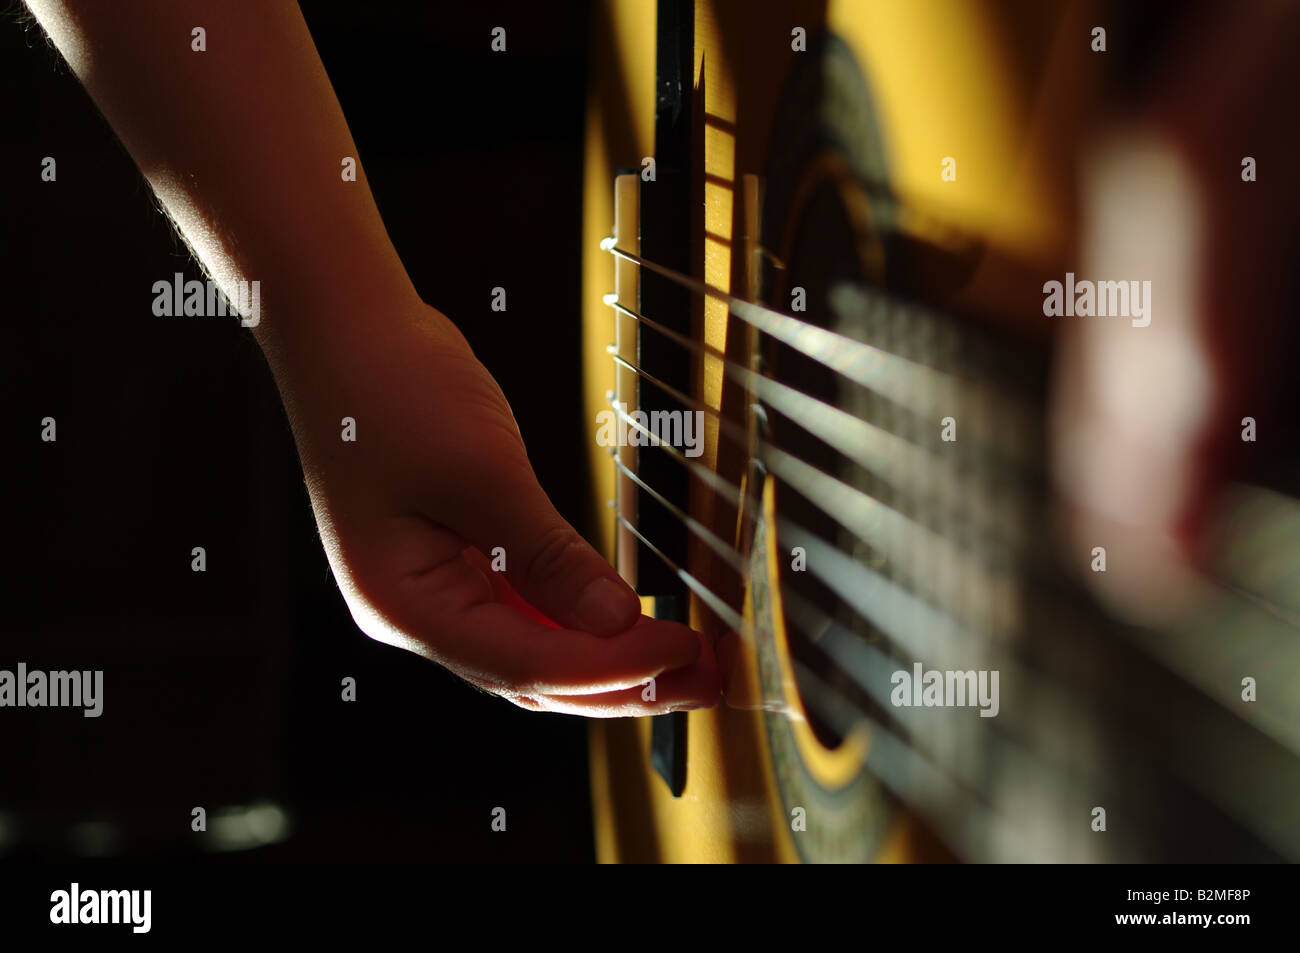 Acoustic guitar play Stock Photo - Alamy